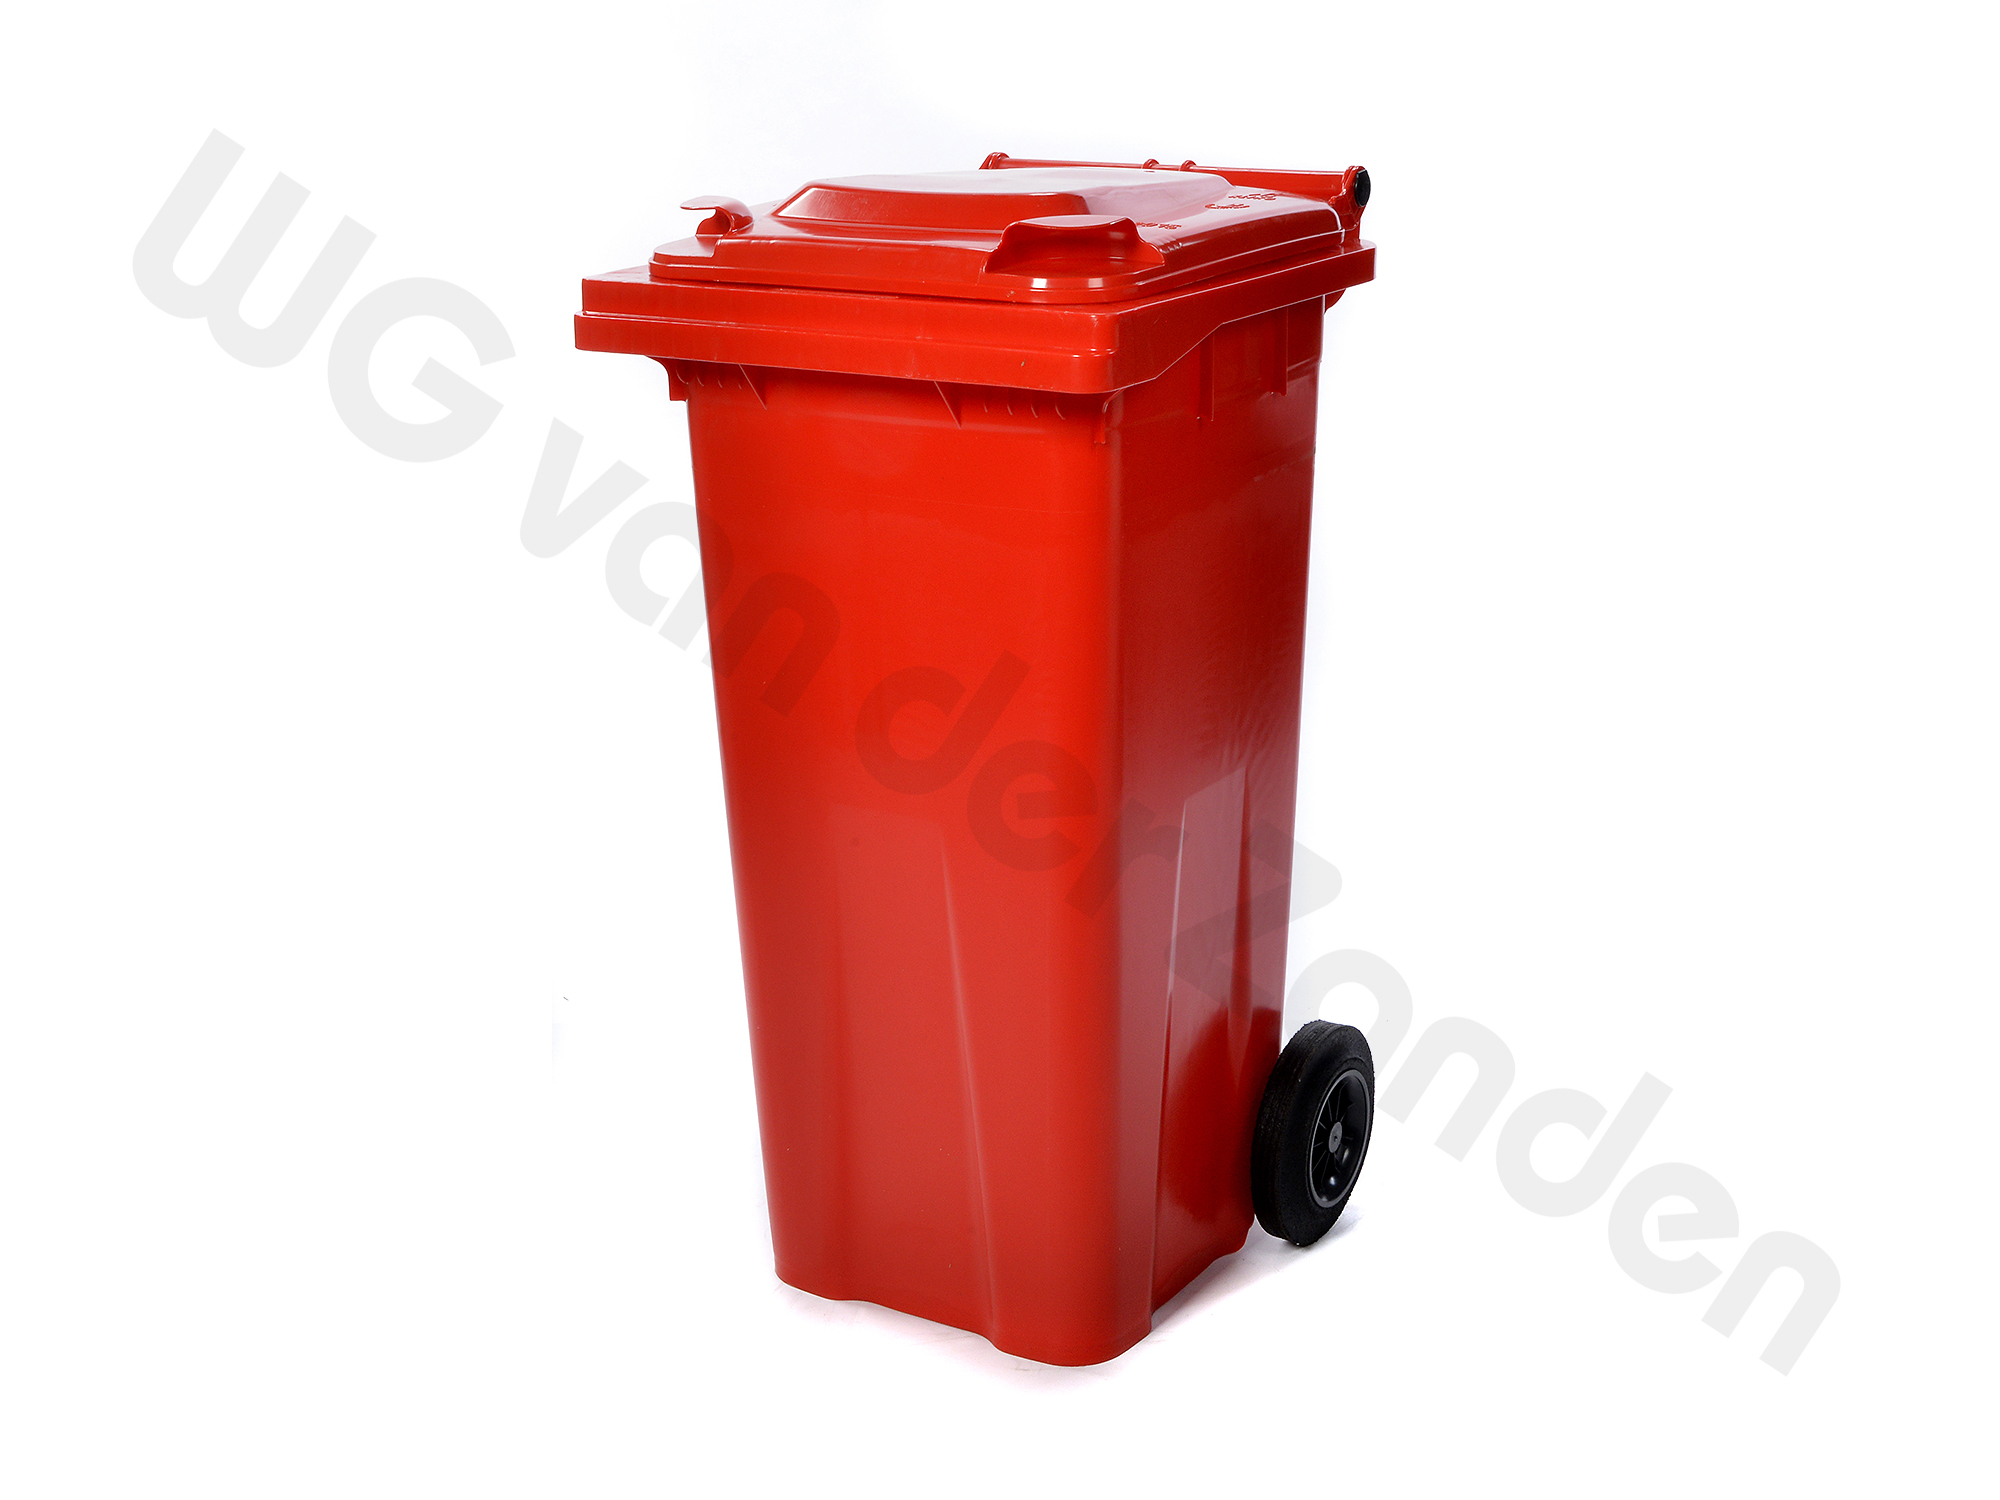 440141 GARBAGE CONTAINER 120 LTR PLASTIC TWO WHEELED RED